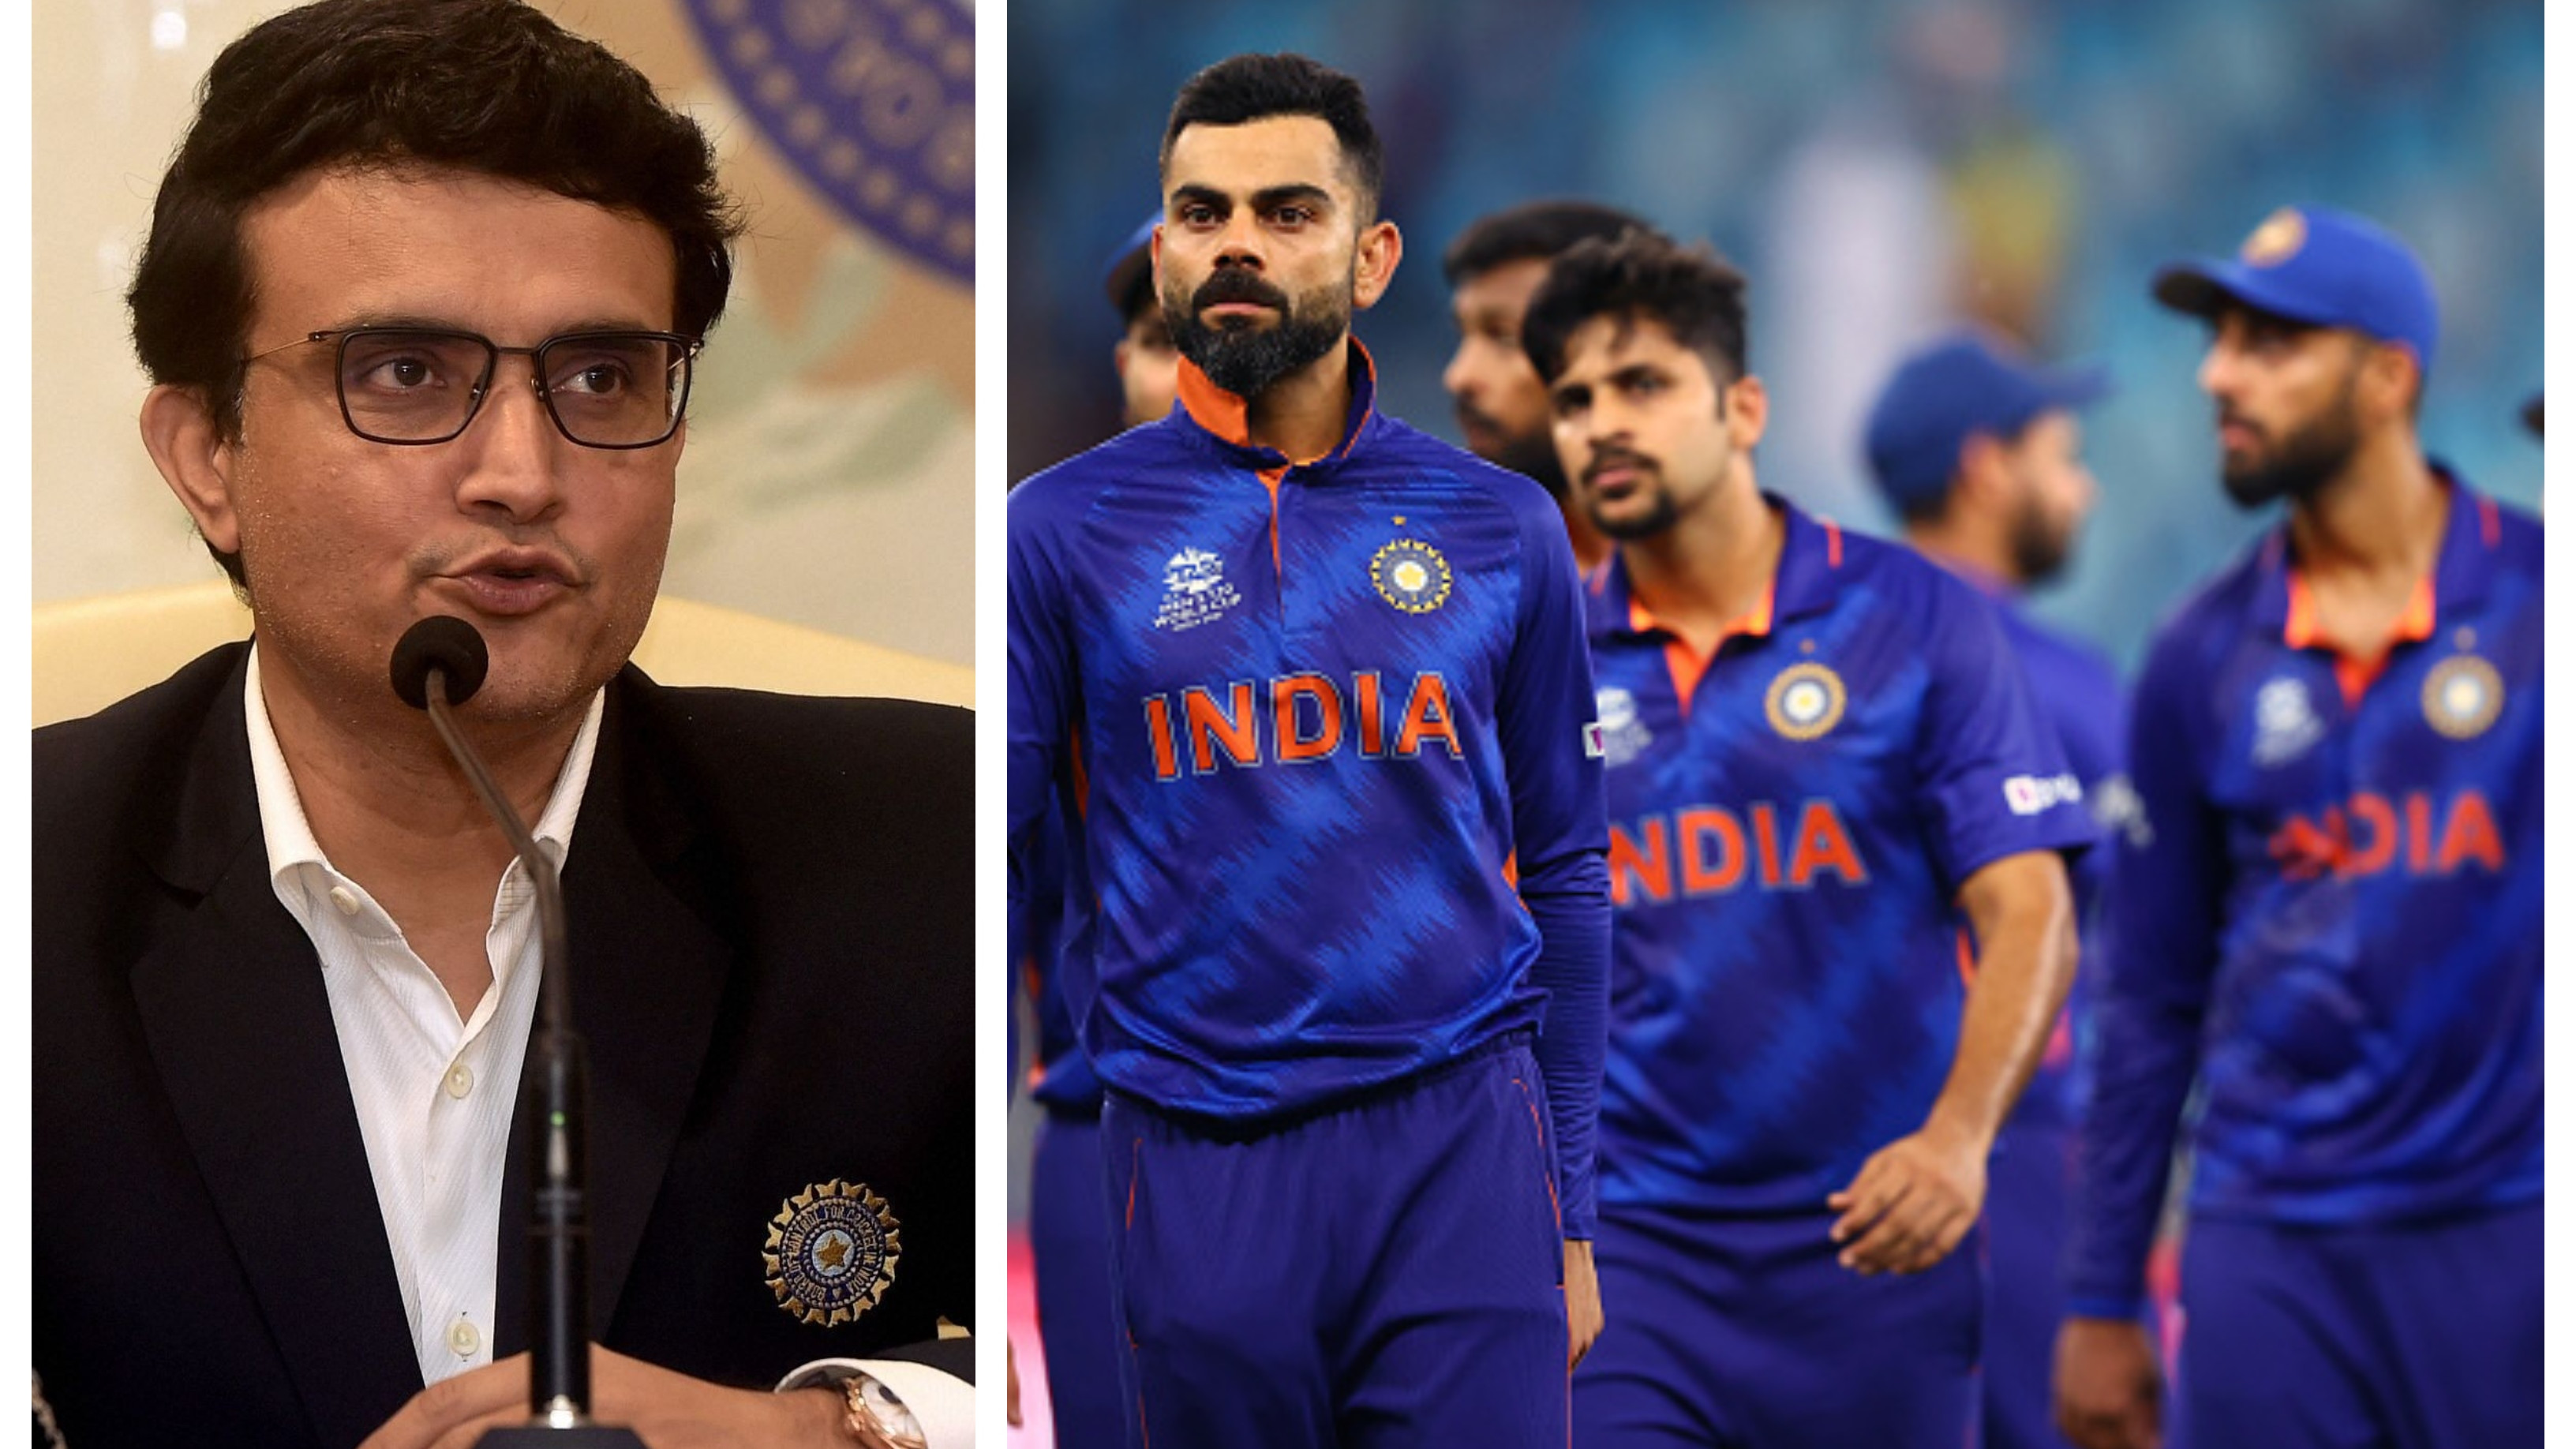 “Poorest in the last four-five years”, Sourav Ganguly reflects on India’s dismal T20 World Cup 2021 campaign